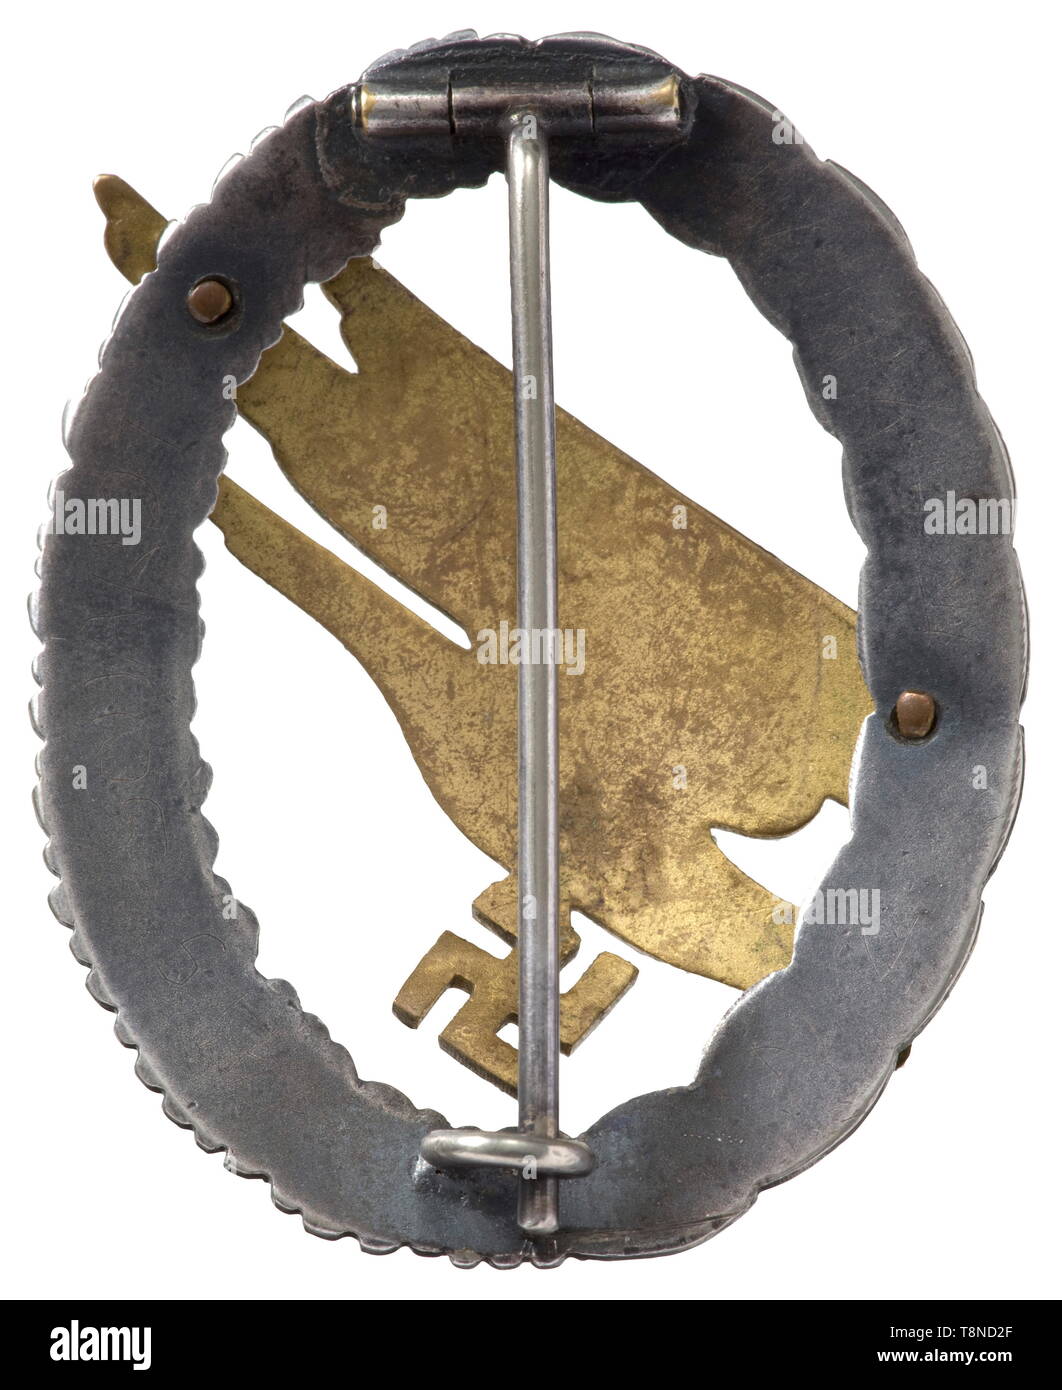 A Paratroper Badge and cuff title - Jäger Rgt. 1 The badge in the thin, non-ferrous metal issue of the Wilhelm Deumer firm in Lüdenscheid (Type A, Durante p. 185). Gilt eagle, burnished wreath, in an outstanding state of preservation. Width 42.8 mm. Weight 25.3 g. Included is a cuff title 'Fallschirm-Jäger Rgt.1' in machine embroidered issue on green cloth. Length 48 cm. The wearer was Hans Schardt, II./Fallschirmj. Rgt. 1. historic, historical, awards, award, German Reich, Third Reich, Nazi era, National Socialism, object, objects, stills, medal, decoration, medals, decora, Editorial-Use-Only Stock Photo